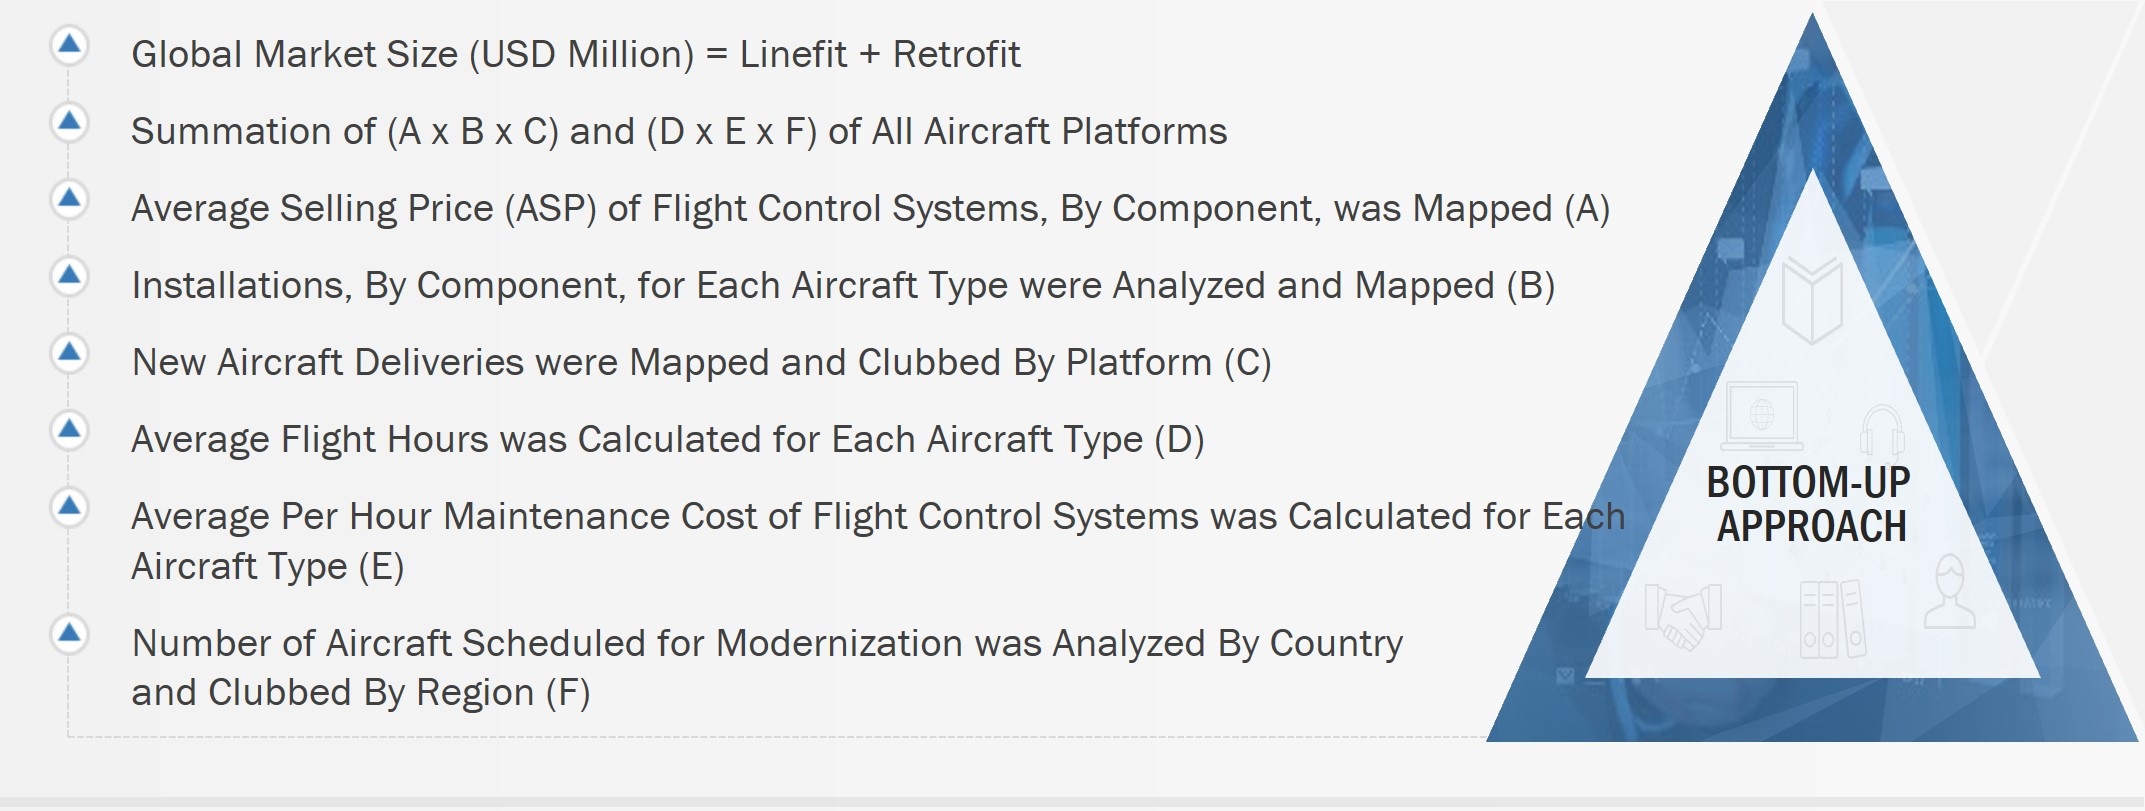 Aircraft Flight Control Systems Market Size, and Bottom-up approach 